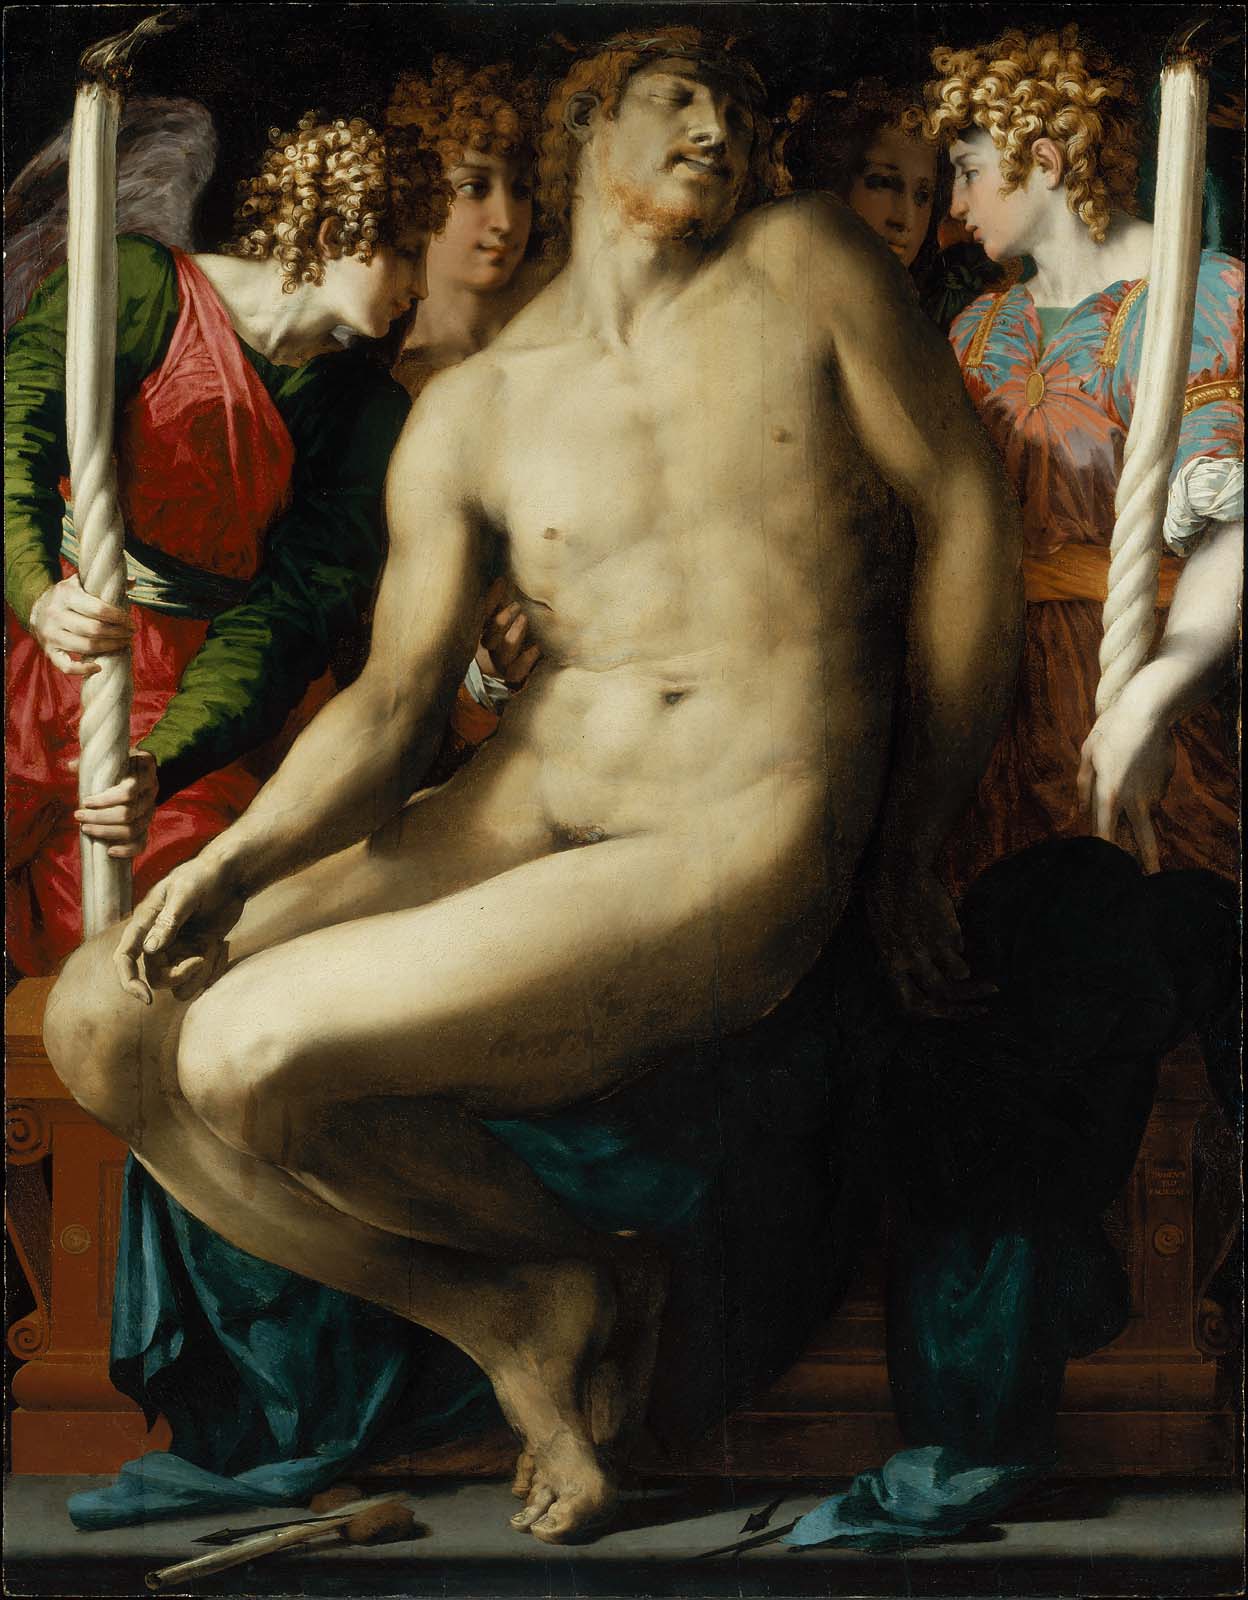 Dead Christ with Angels by Rosso Fiorentino